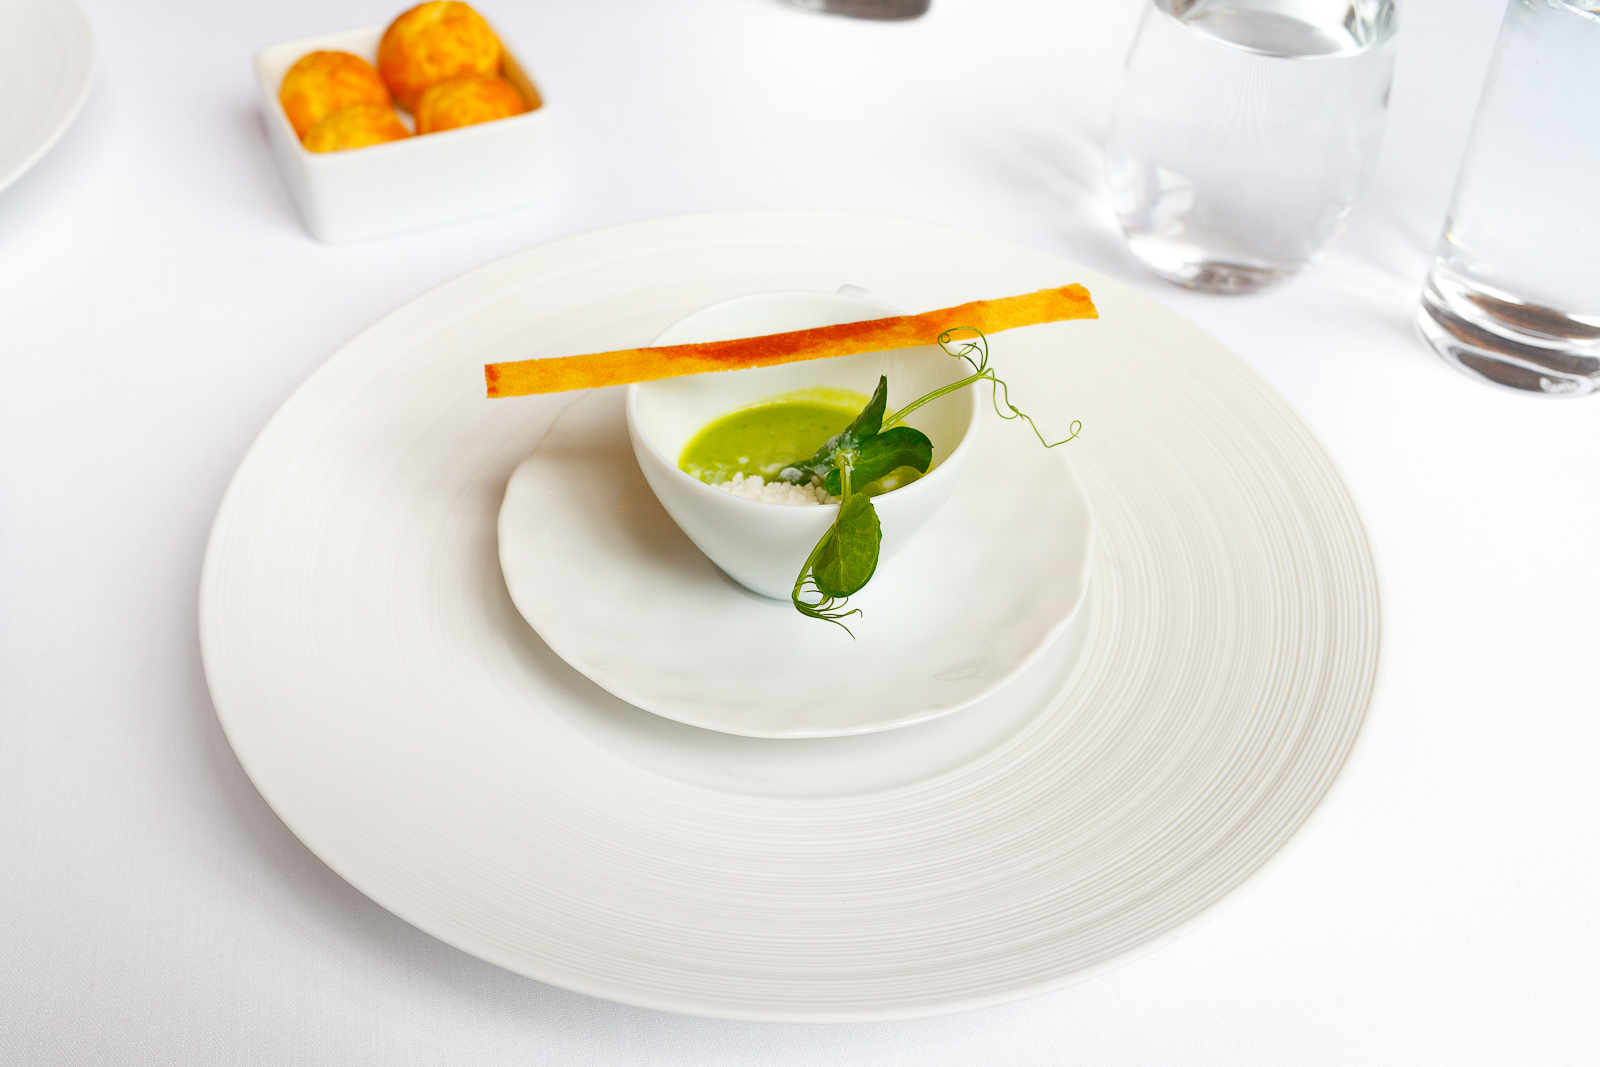 Canape: Chilled pea soup with ham chip